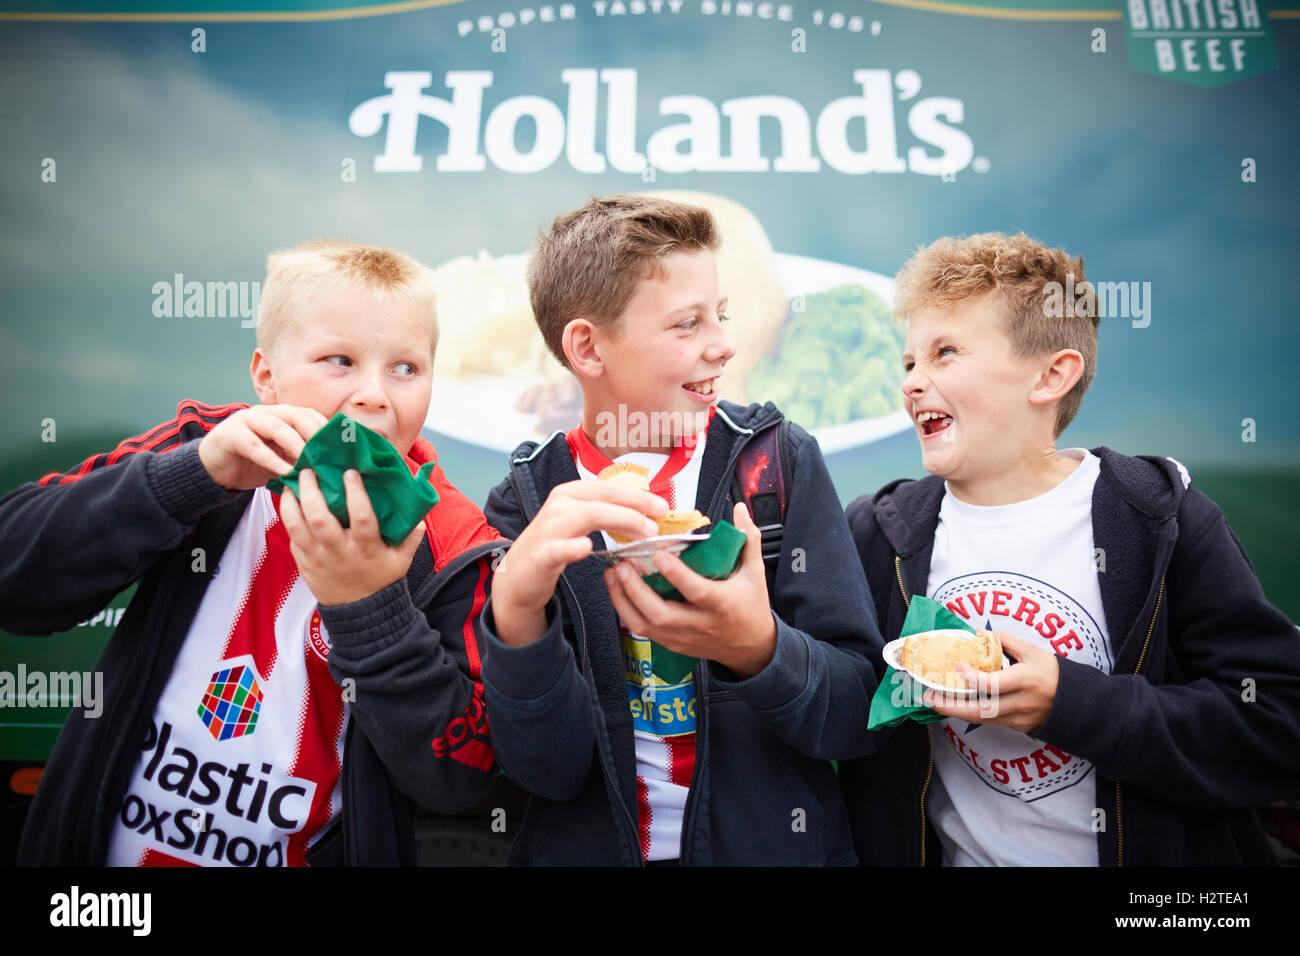 Football fans eating pies Hollands   Accrington Stanly FC fans match game eating pies happy laughing Young kids children youngst Stock Photo